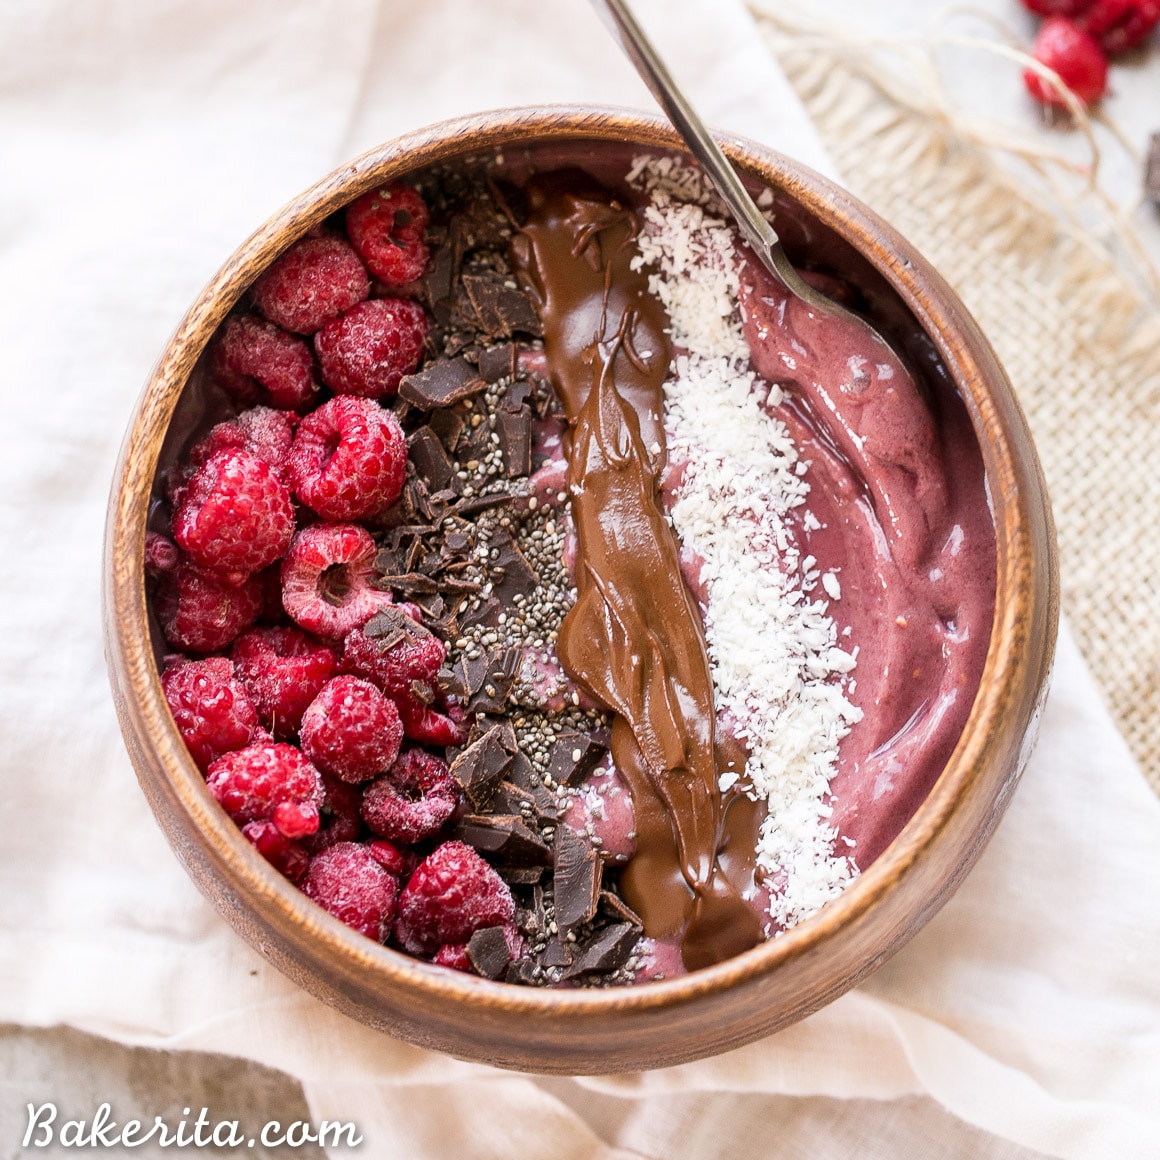 This Raspberry Acai Bowl is a refreshing & delicious breakfast, especially when you add your favorite toppings! This healthy breakfast is ready in a few minutes.